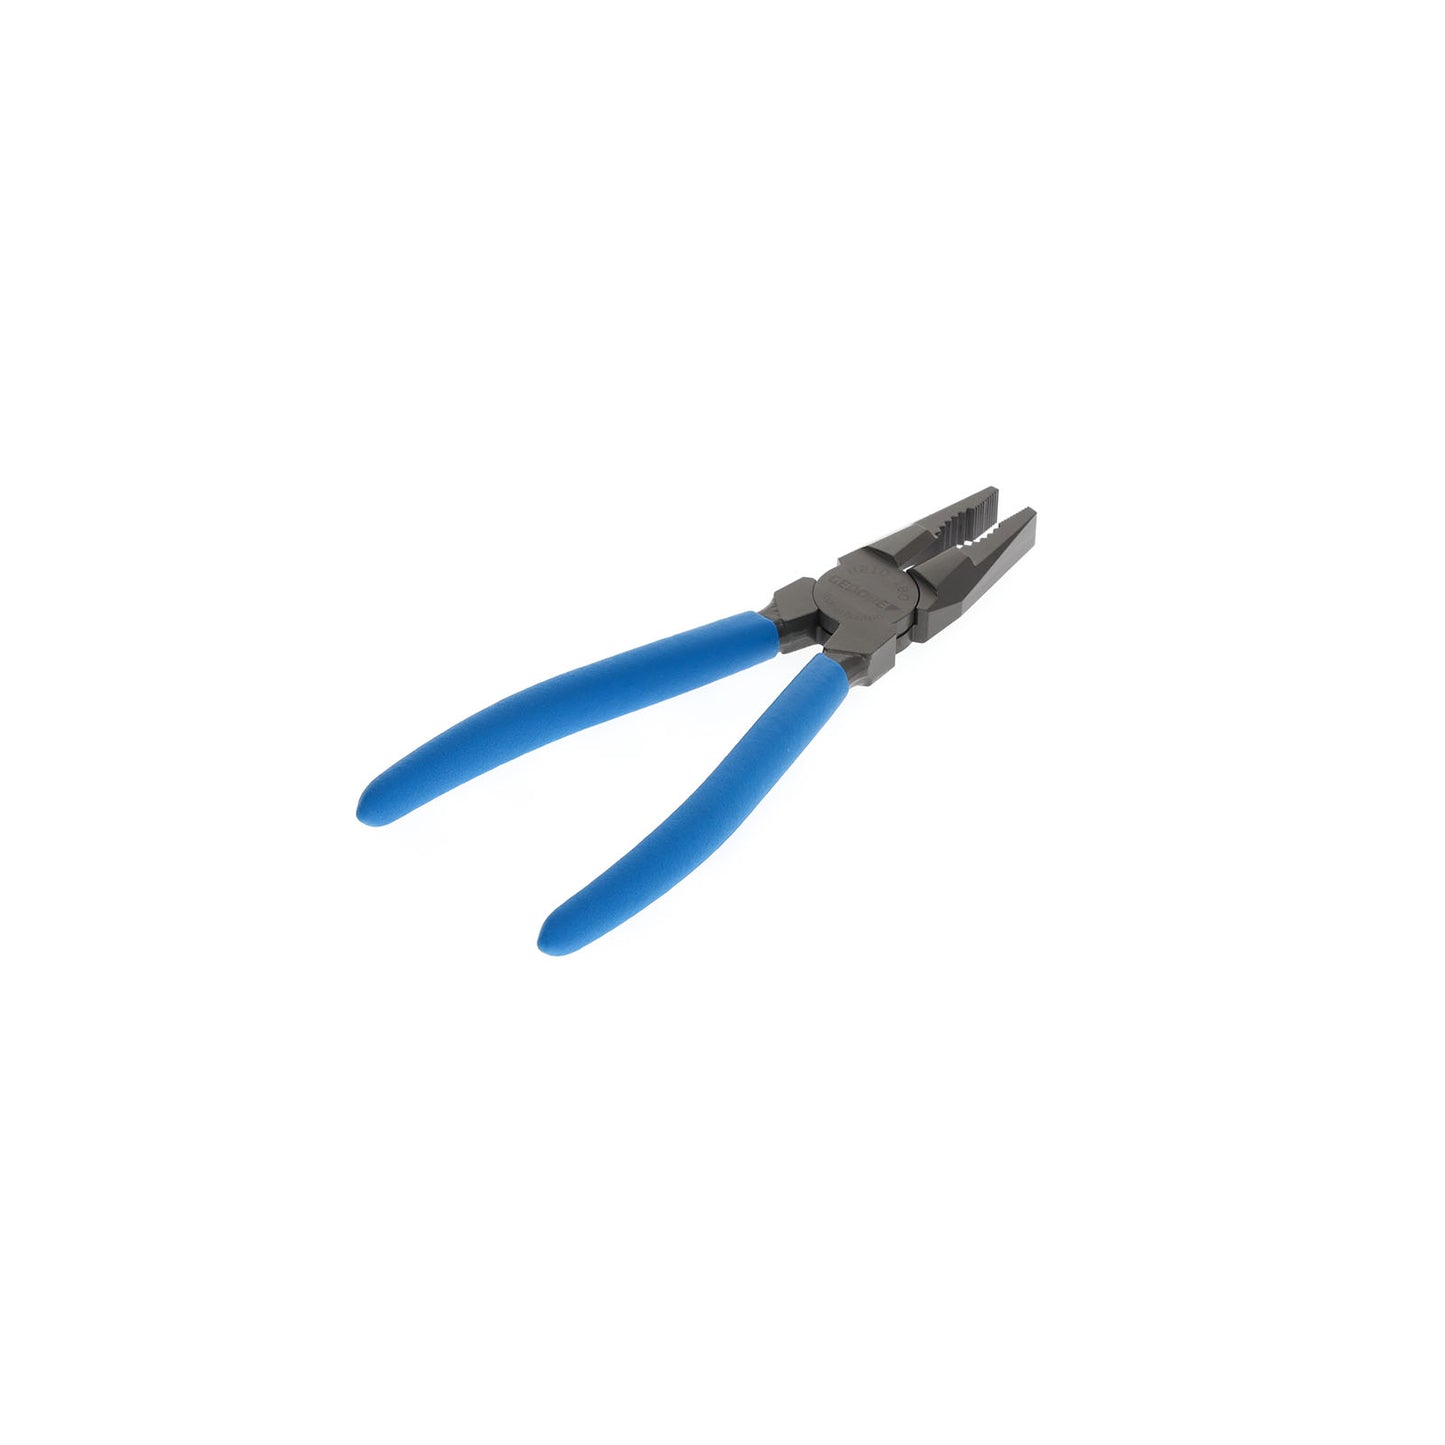 GEDORE 8210-180 TL - Universal pliers 180 mm (6711420)